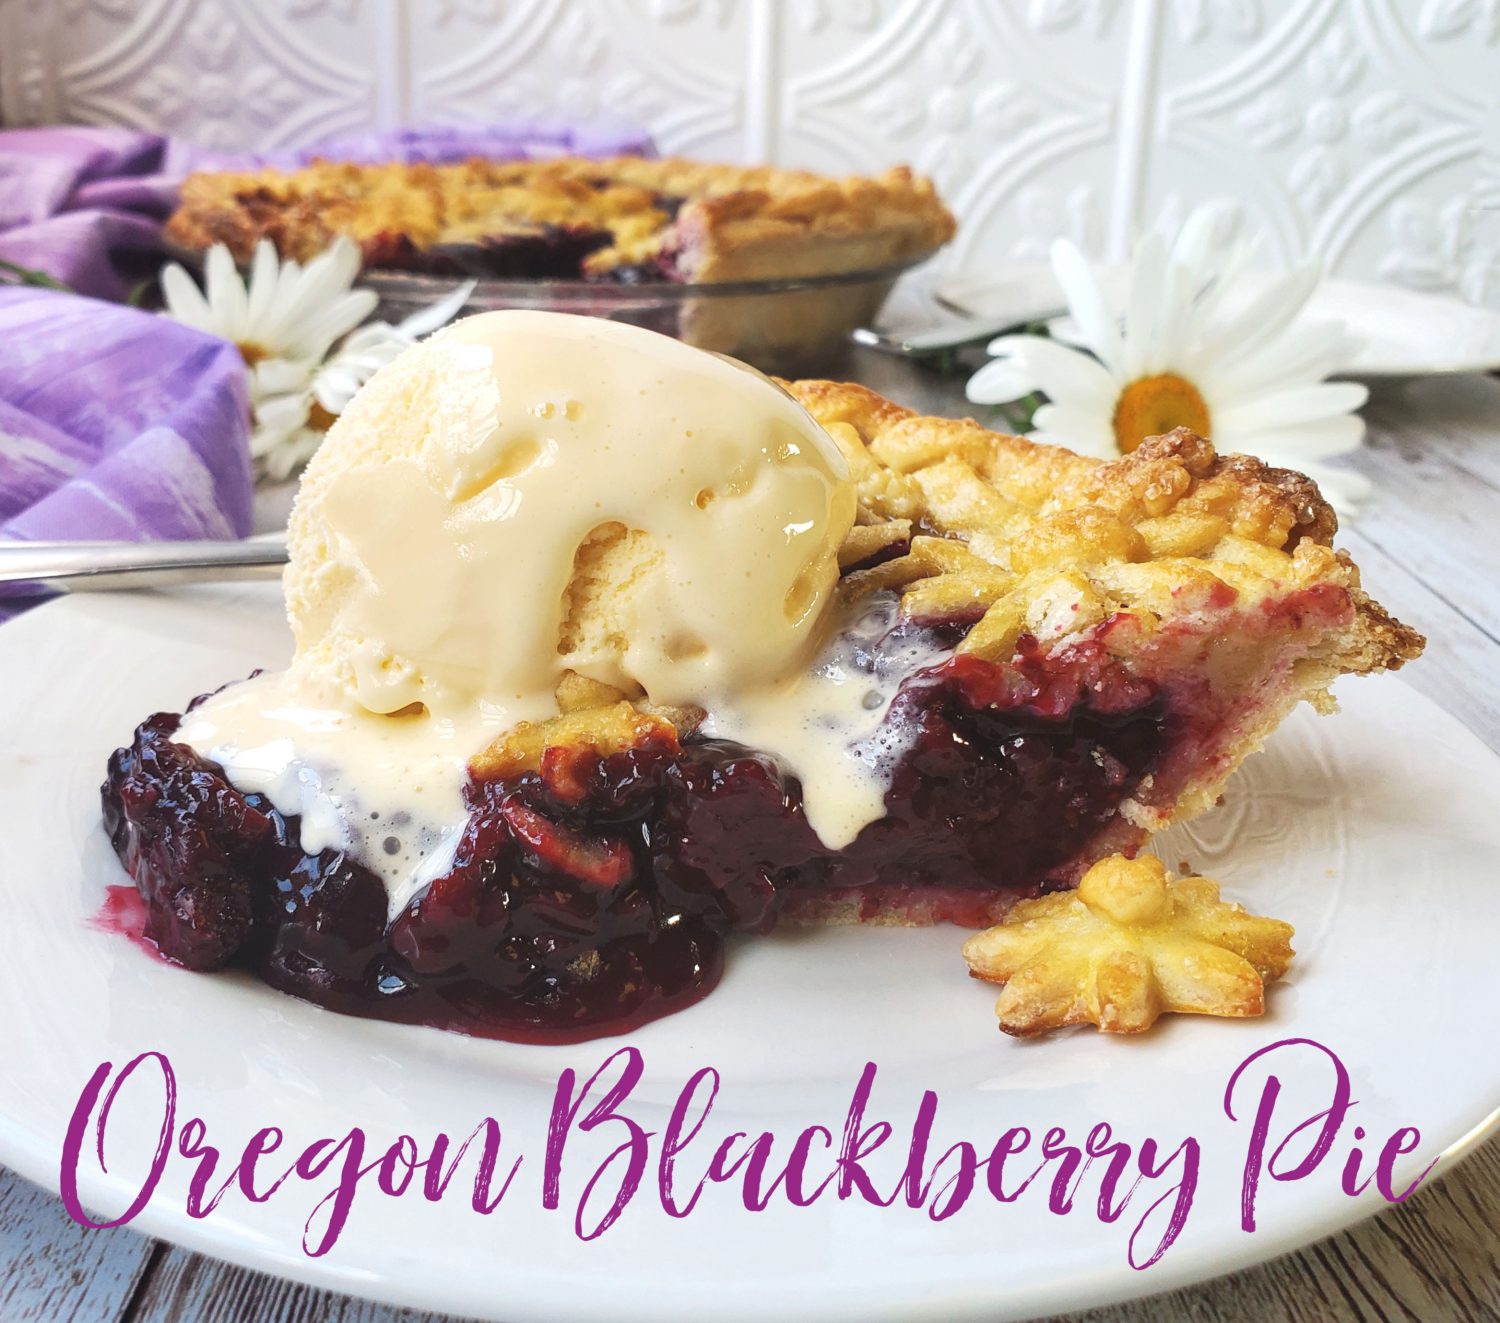 Oregon Blackberry Pie (aka Marionberry); best berries on the planet! Fresh picked blackberries baked in a super flaky crust: Very Berry-licious indeed.